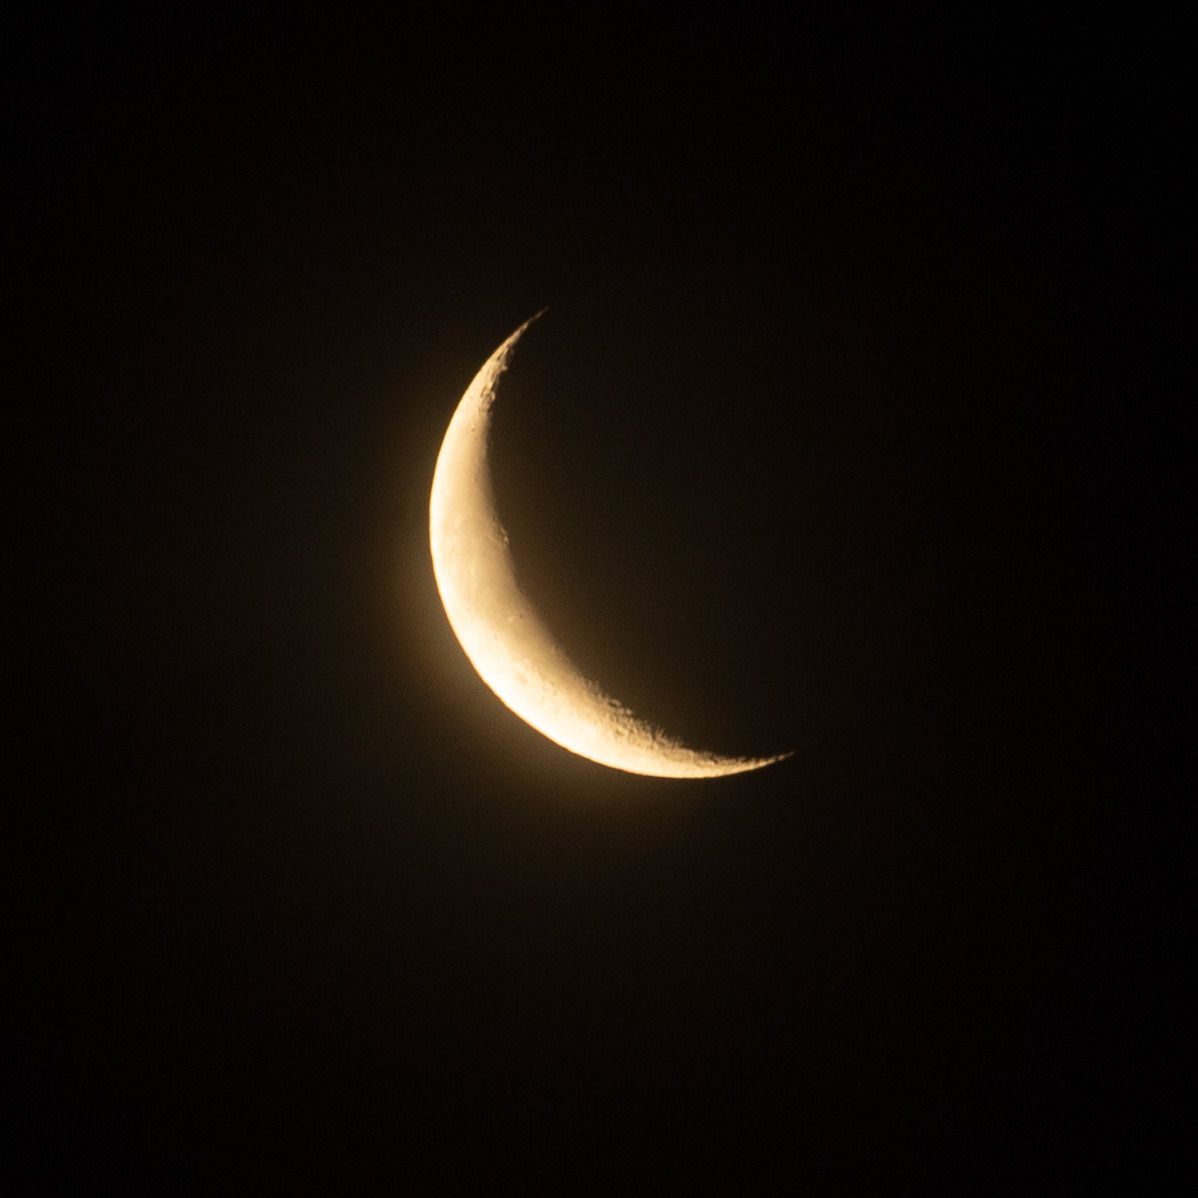 A waxing crescent moon in the night sky. - Moon